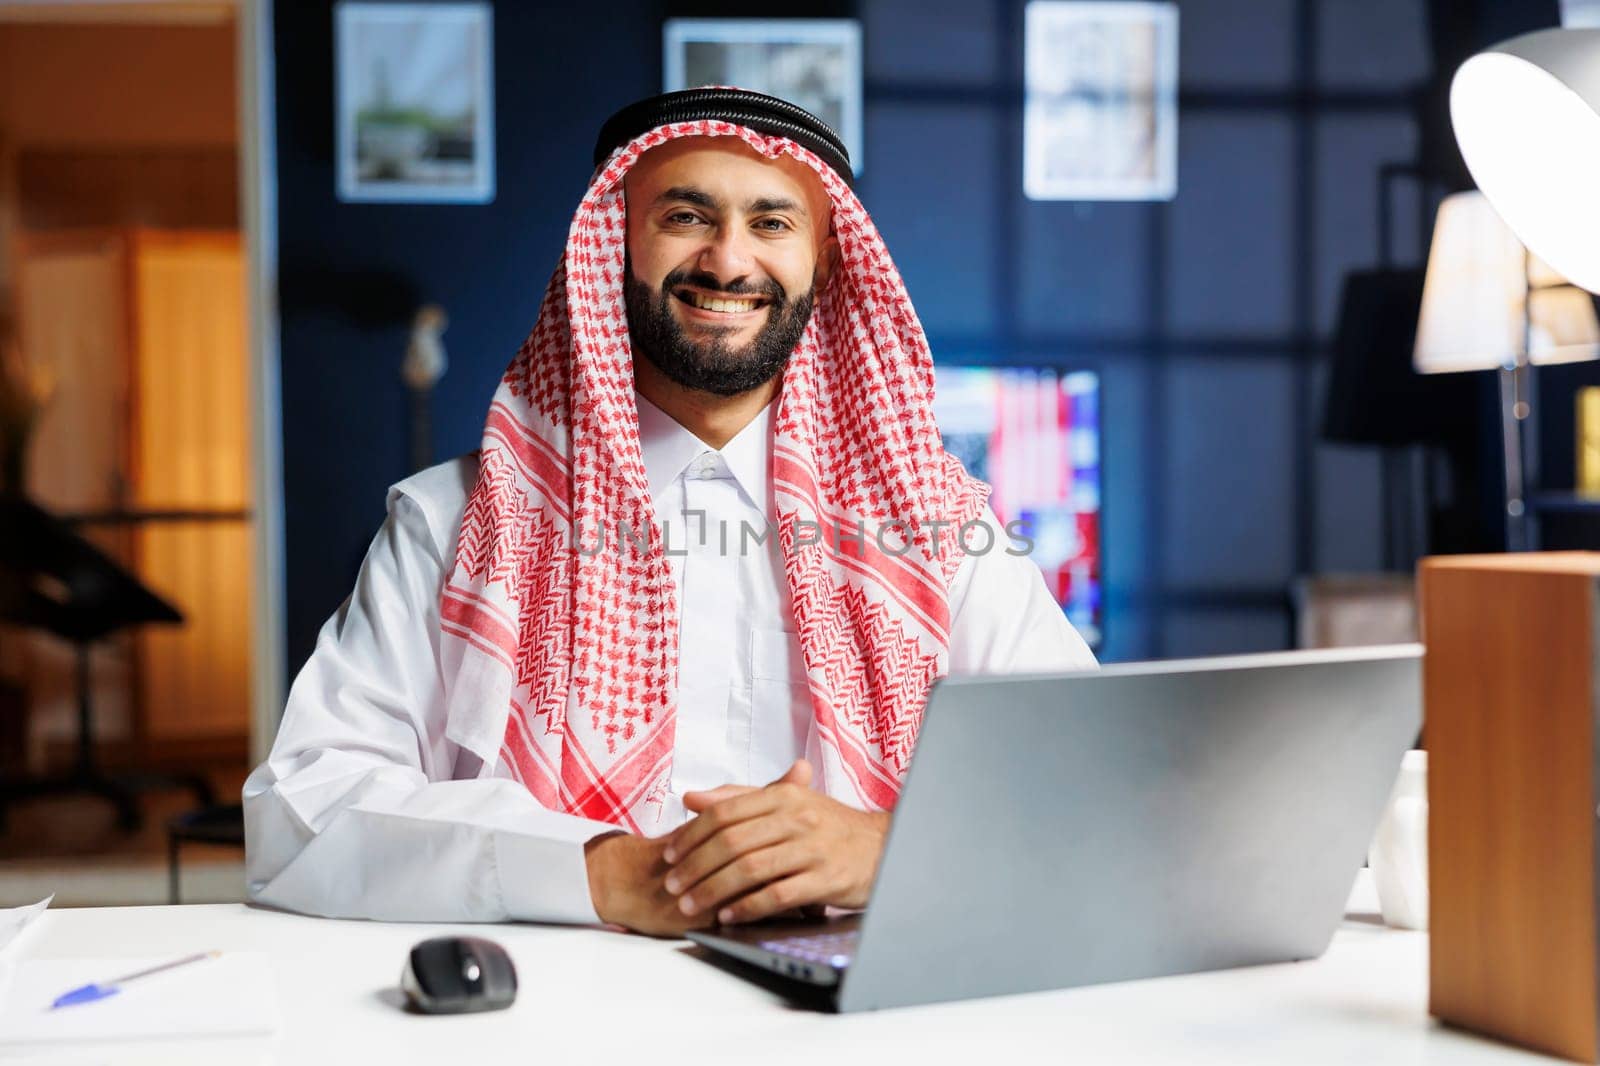 Male person dressed in traditional Arabic clothing is seated with his laptop. Confident and tech-savvy, the Arab man smiles at the camera, embodying the entrepreneurial spirit of the digital age.